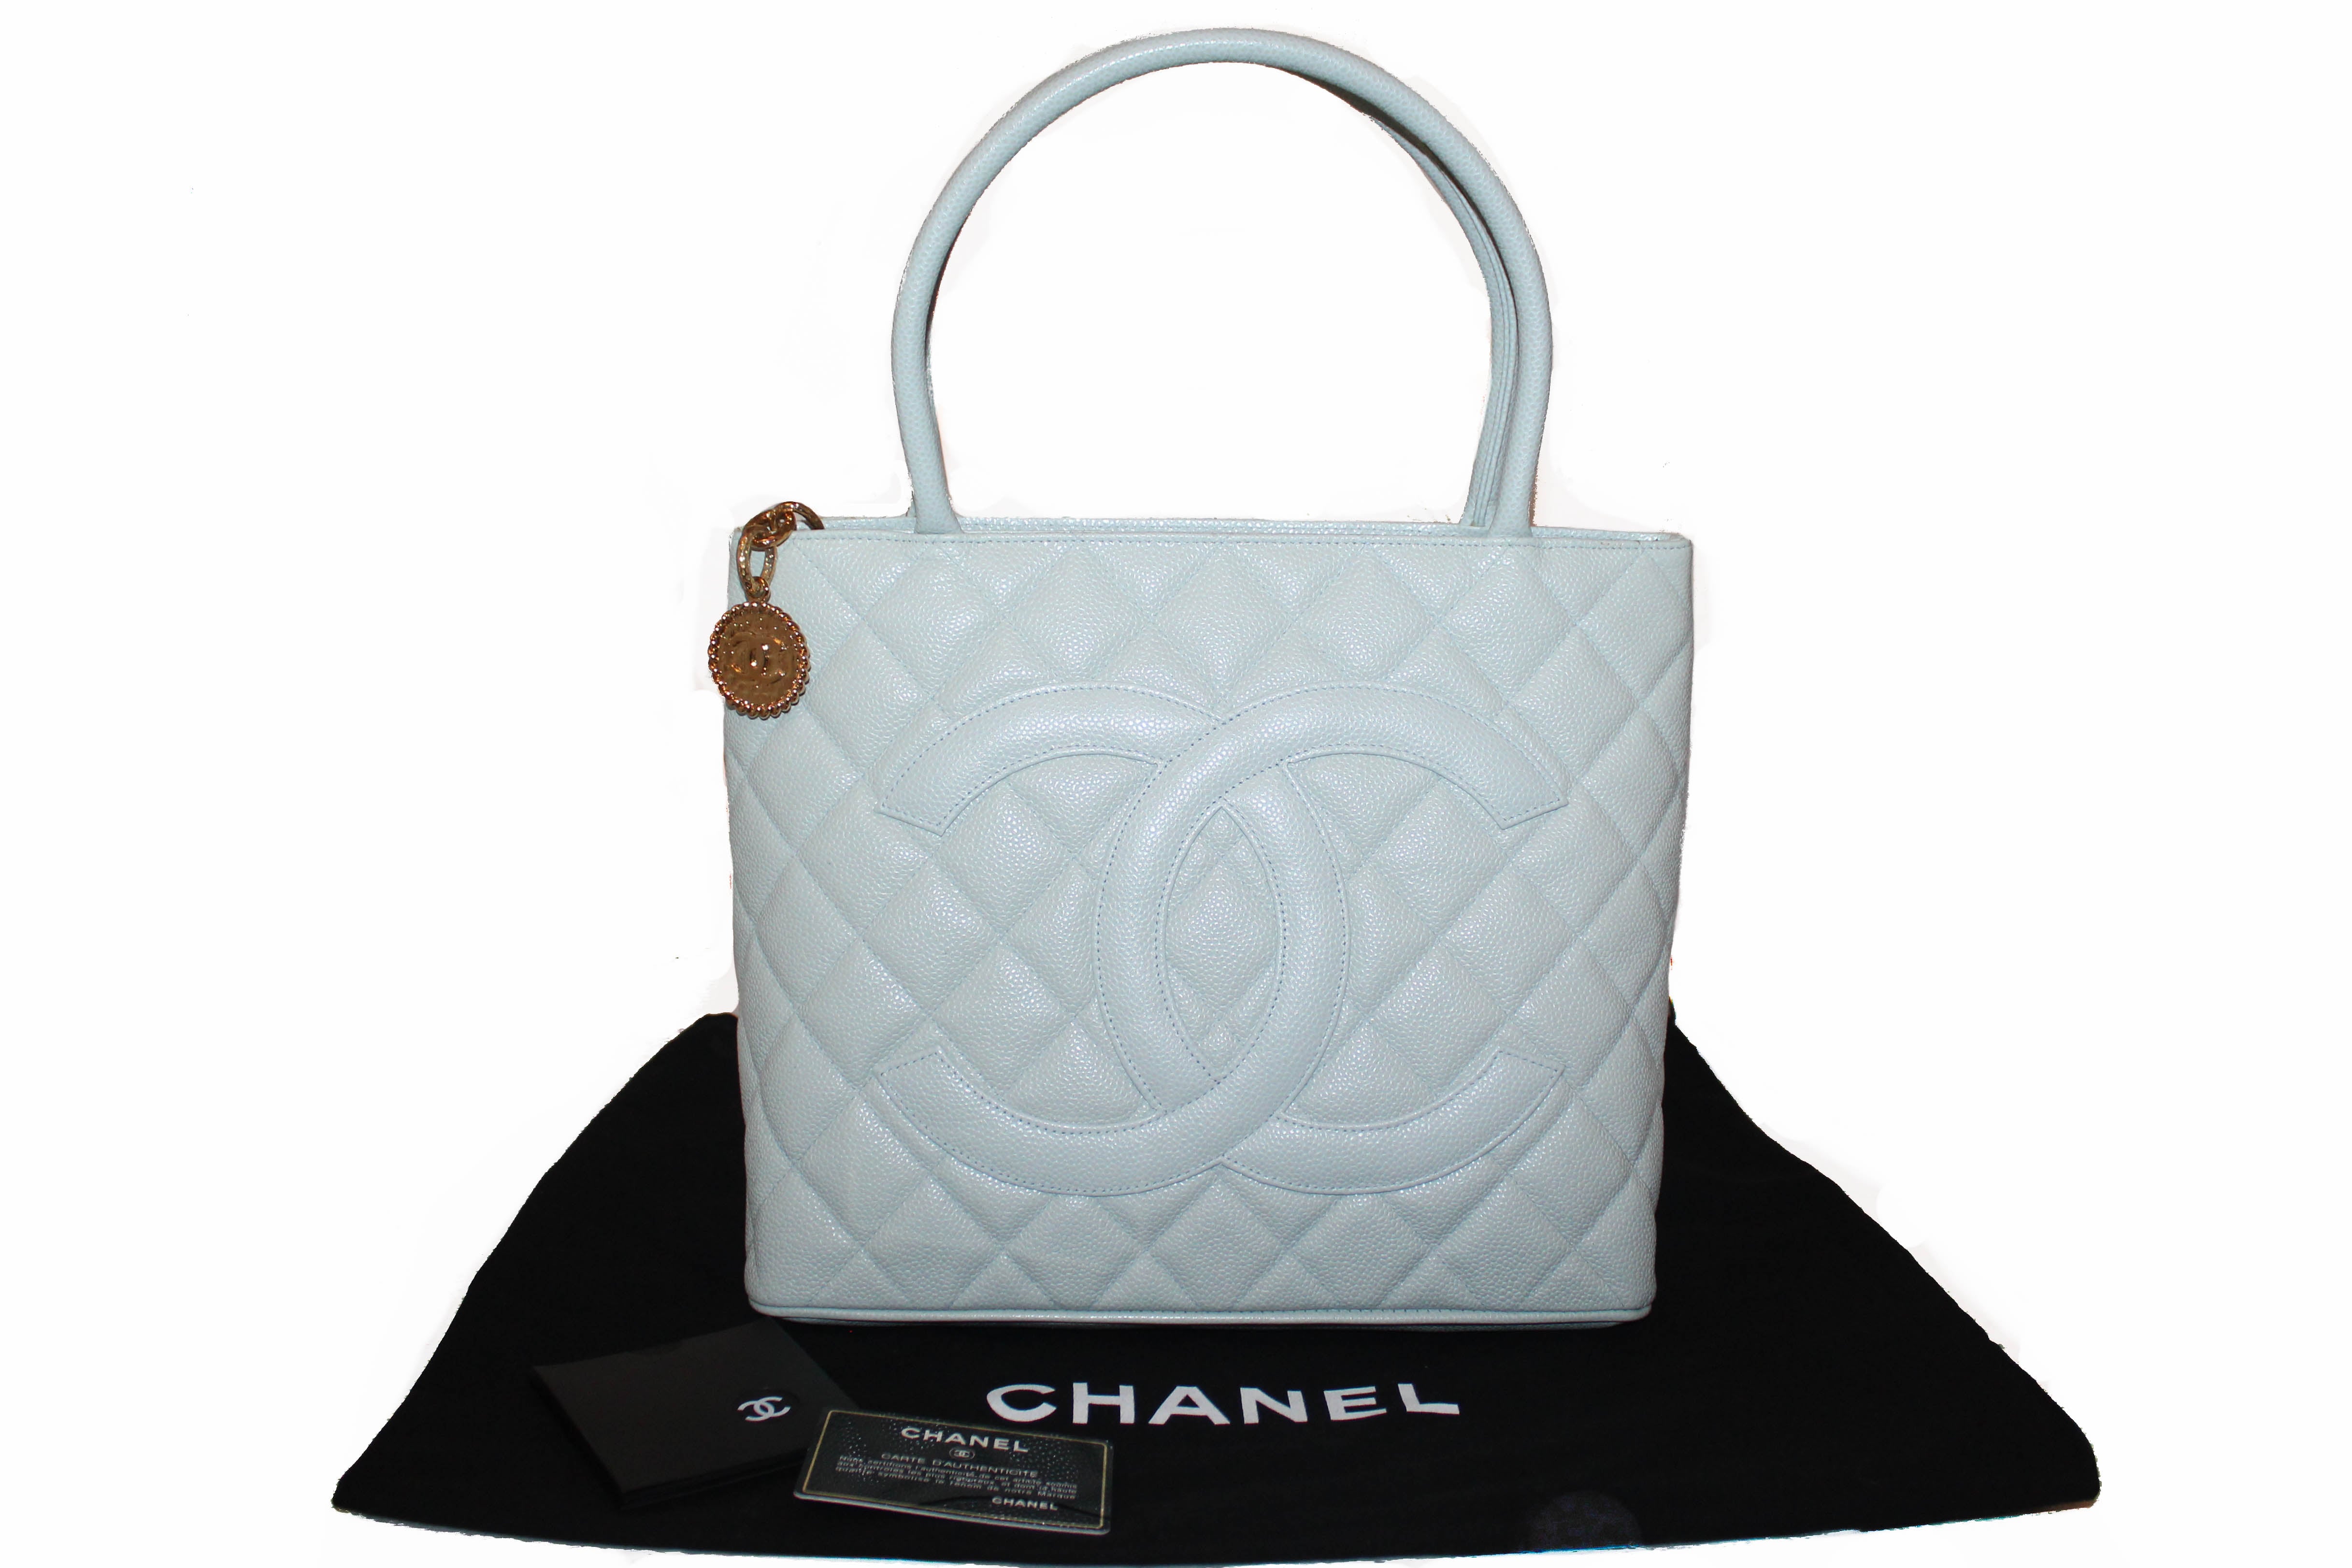 CHANEL, Bags, Authentic Quilted Caviar Leather Chanel Medallion Tote